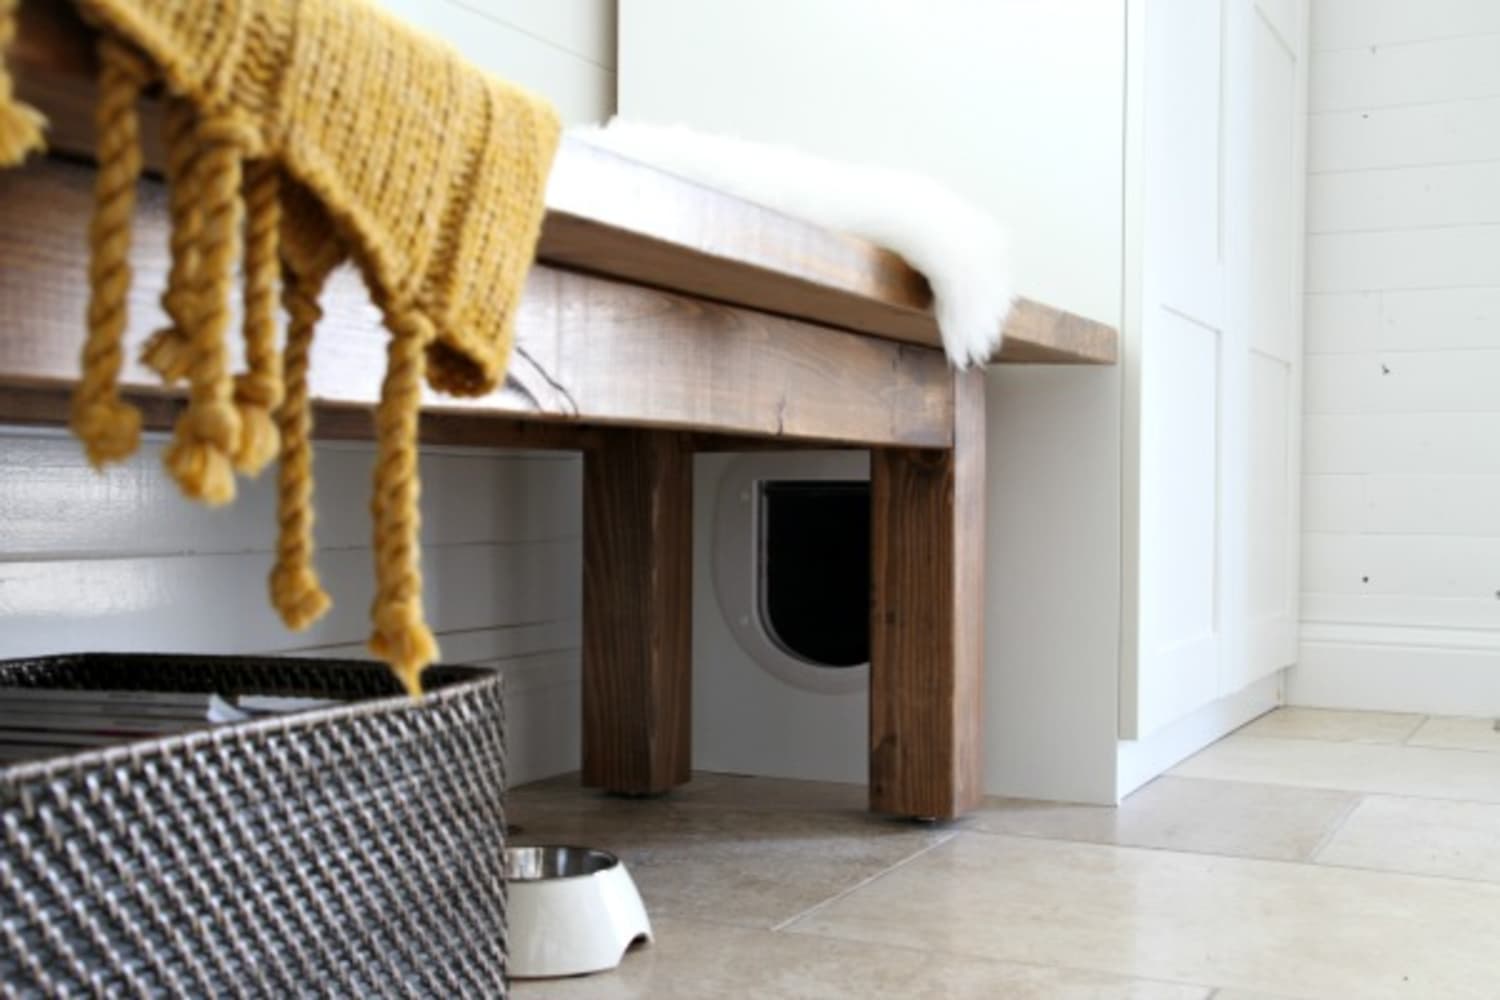 Where to put a litter box in a small apartment - The Washington Post